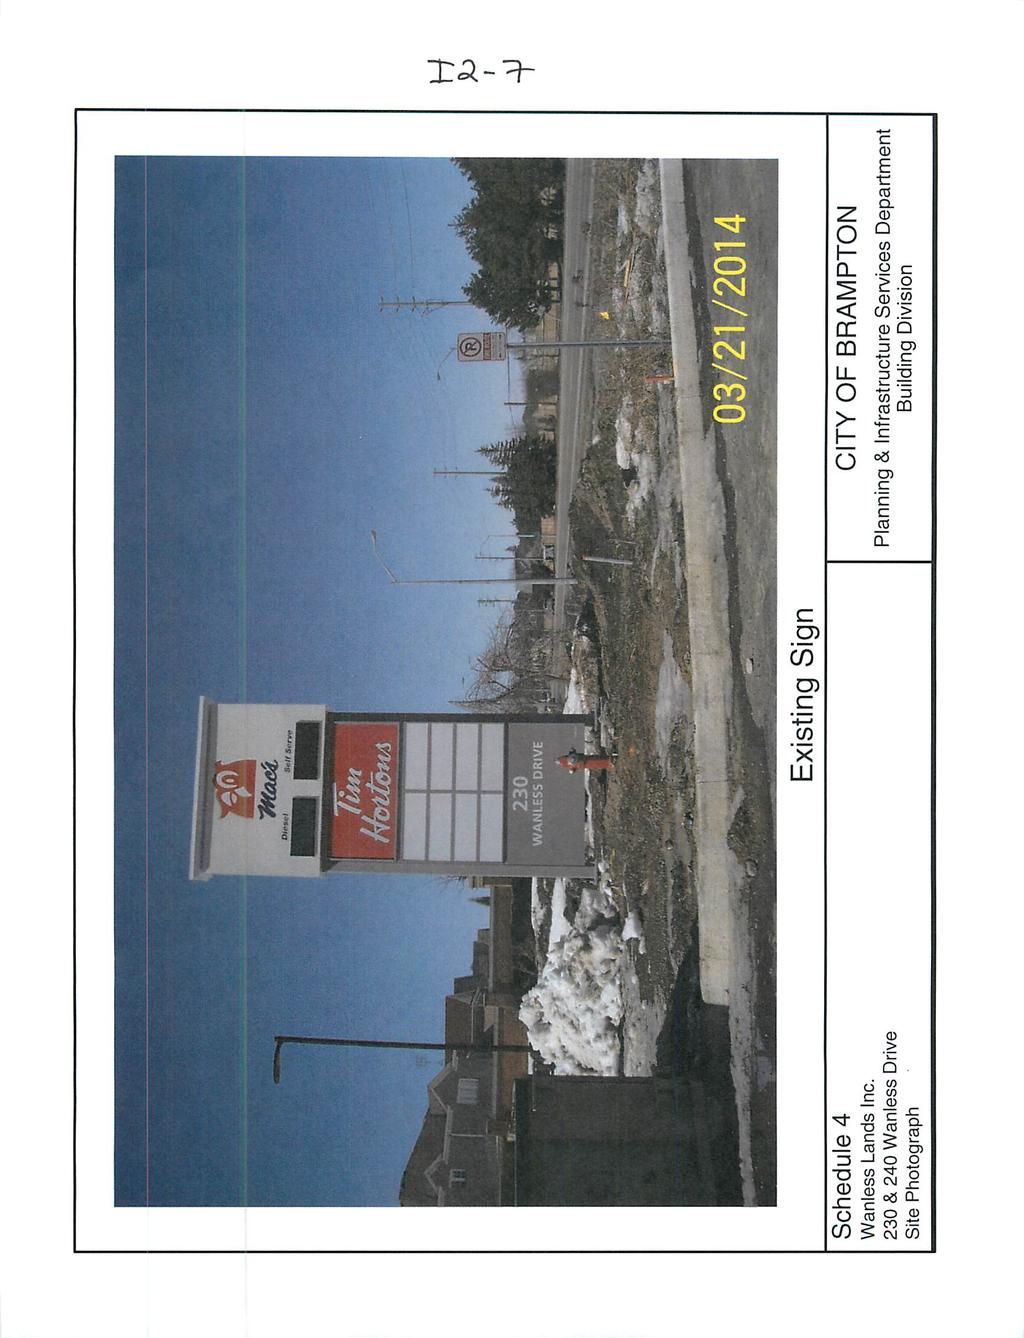 H I Existing Sign Schedule 4 CITY OF BRAMPTON 230 & 240 Wanless Drive Site